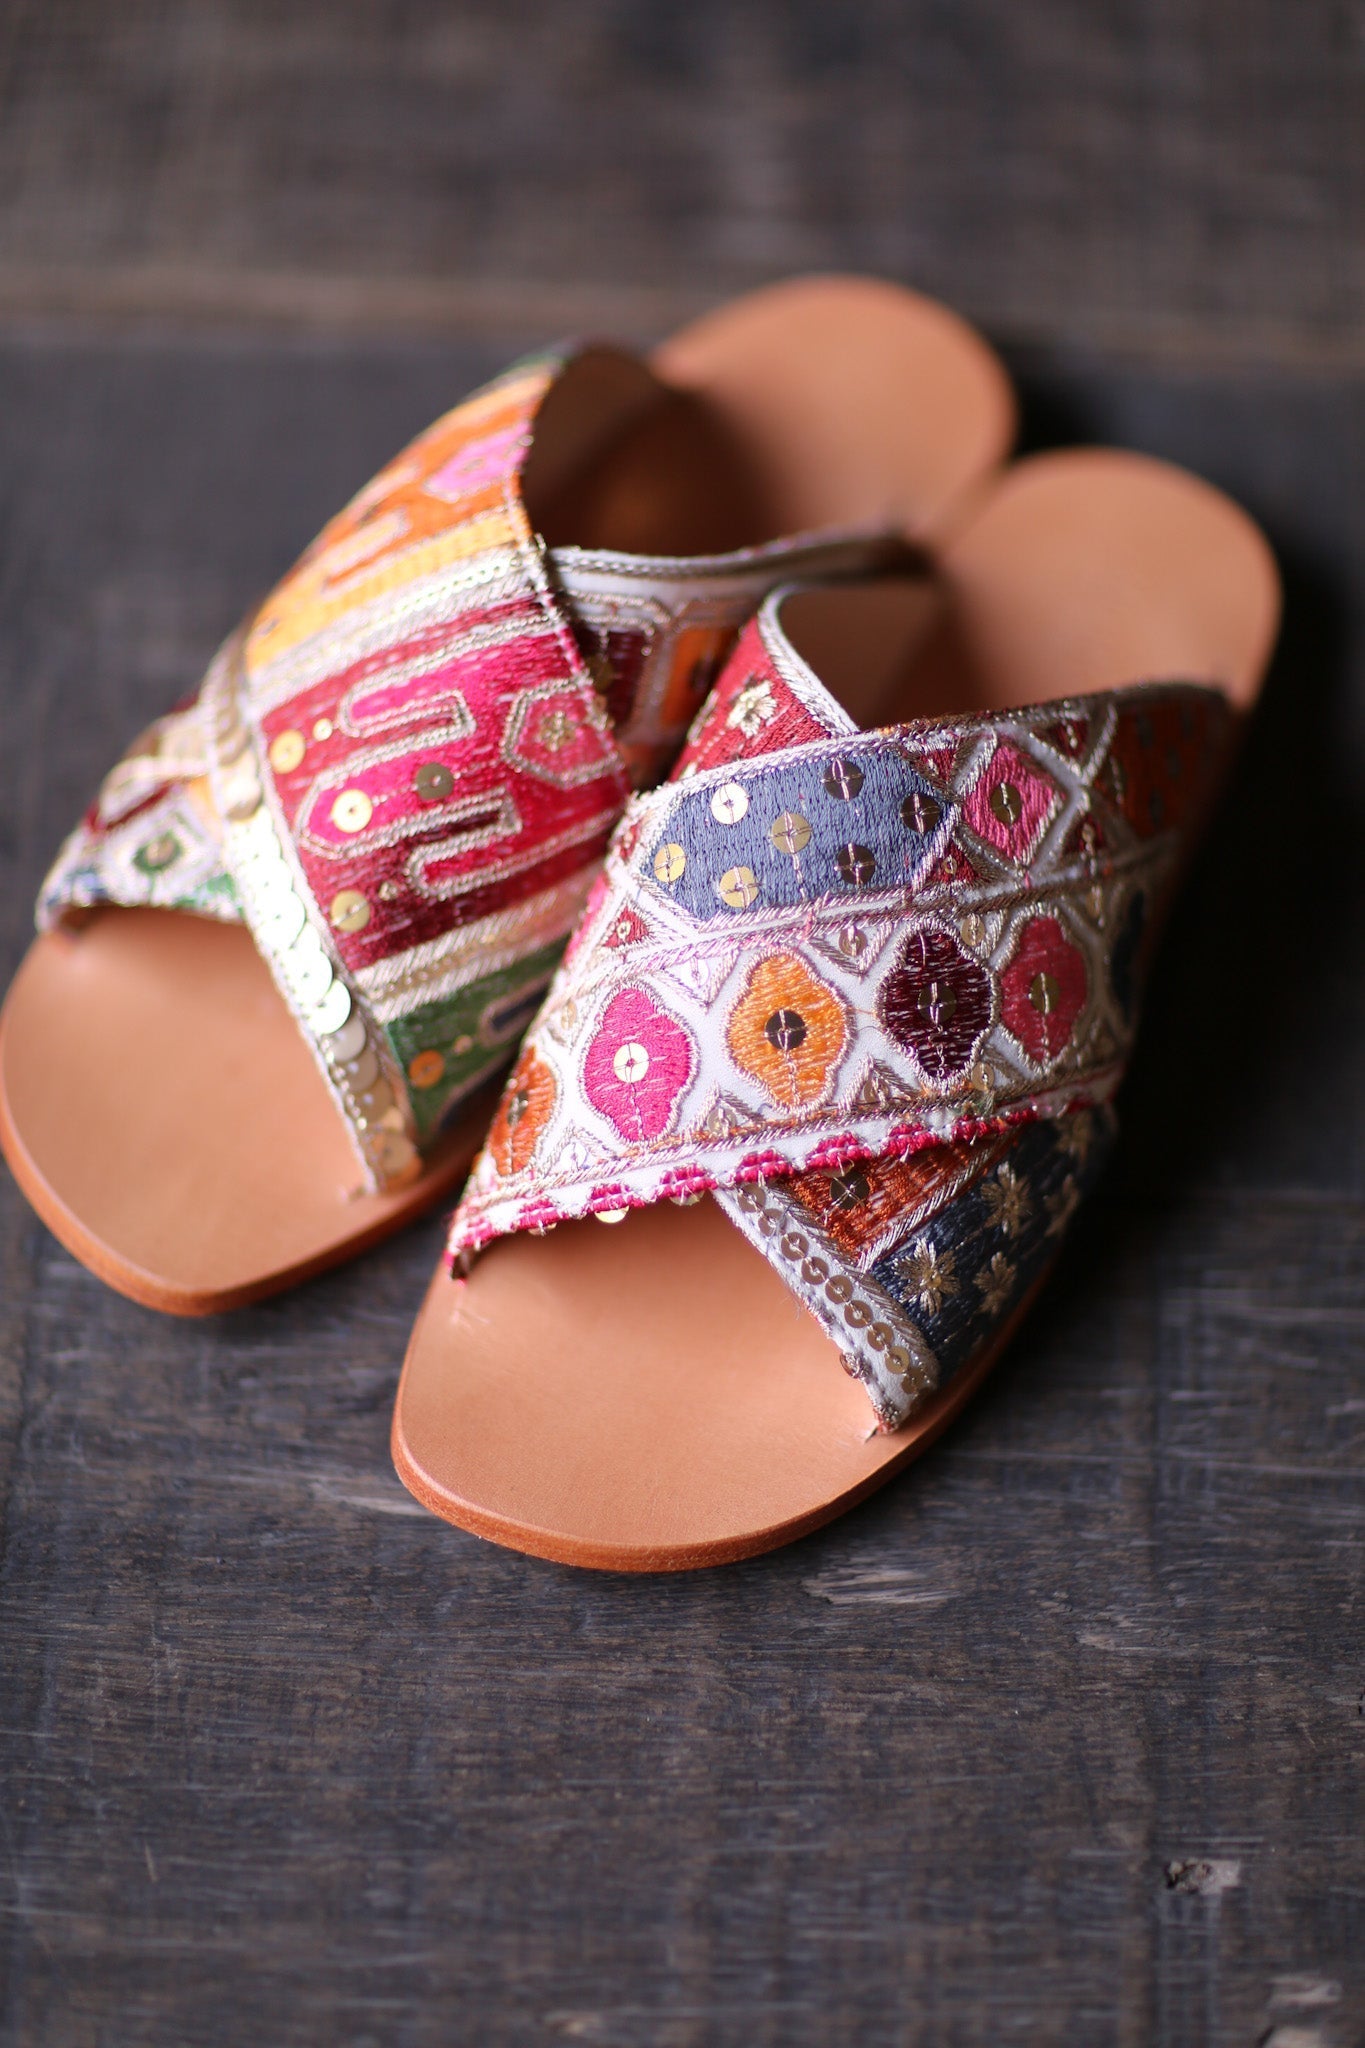 EMBROIDERED LEATHER SLIP ON SANDALS TRIBECA - sustainably made MOMO NEW YORK sustainable clothing, sandals slow fashion